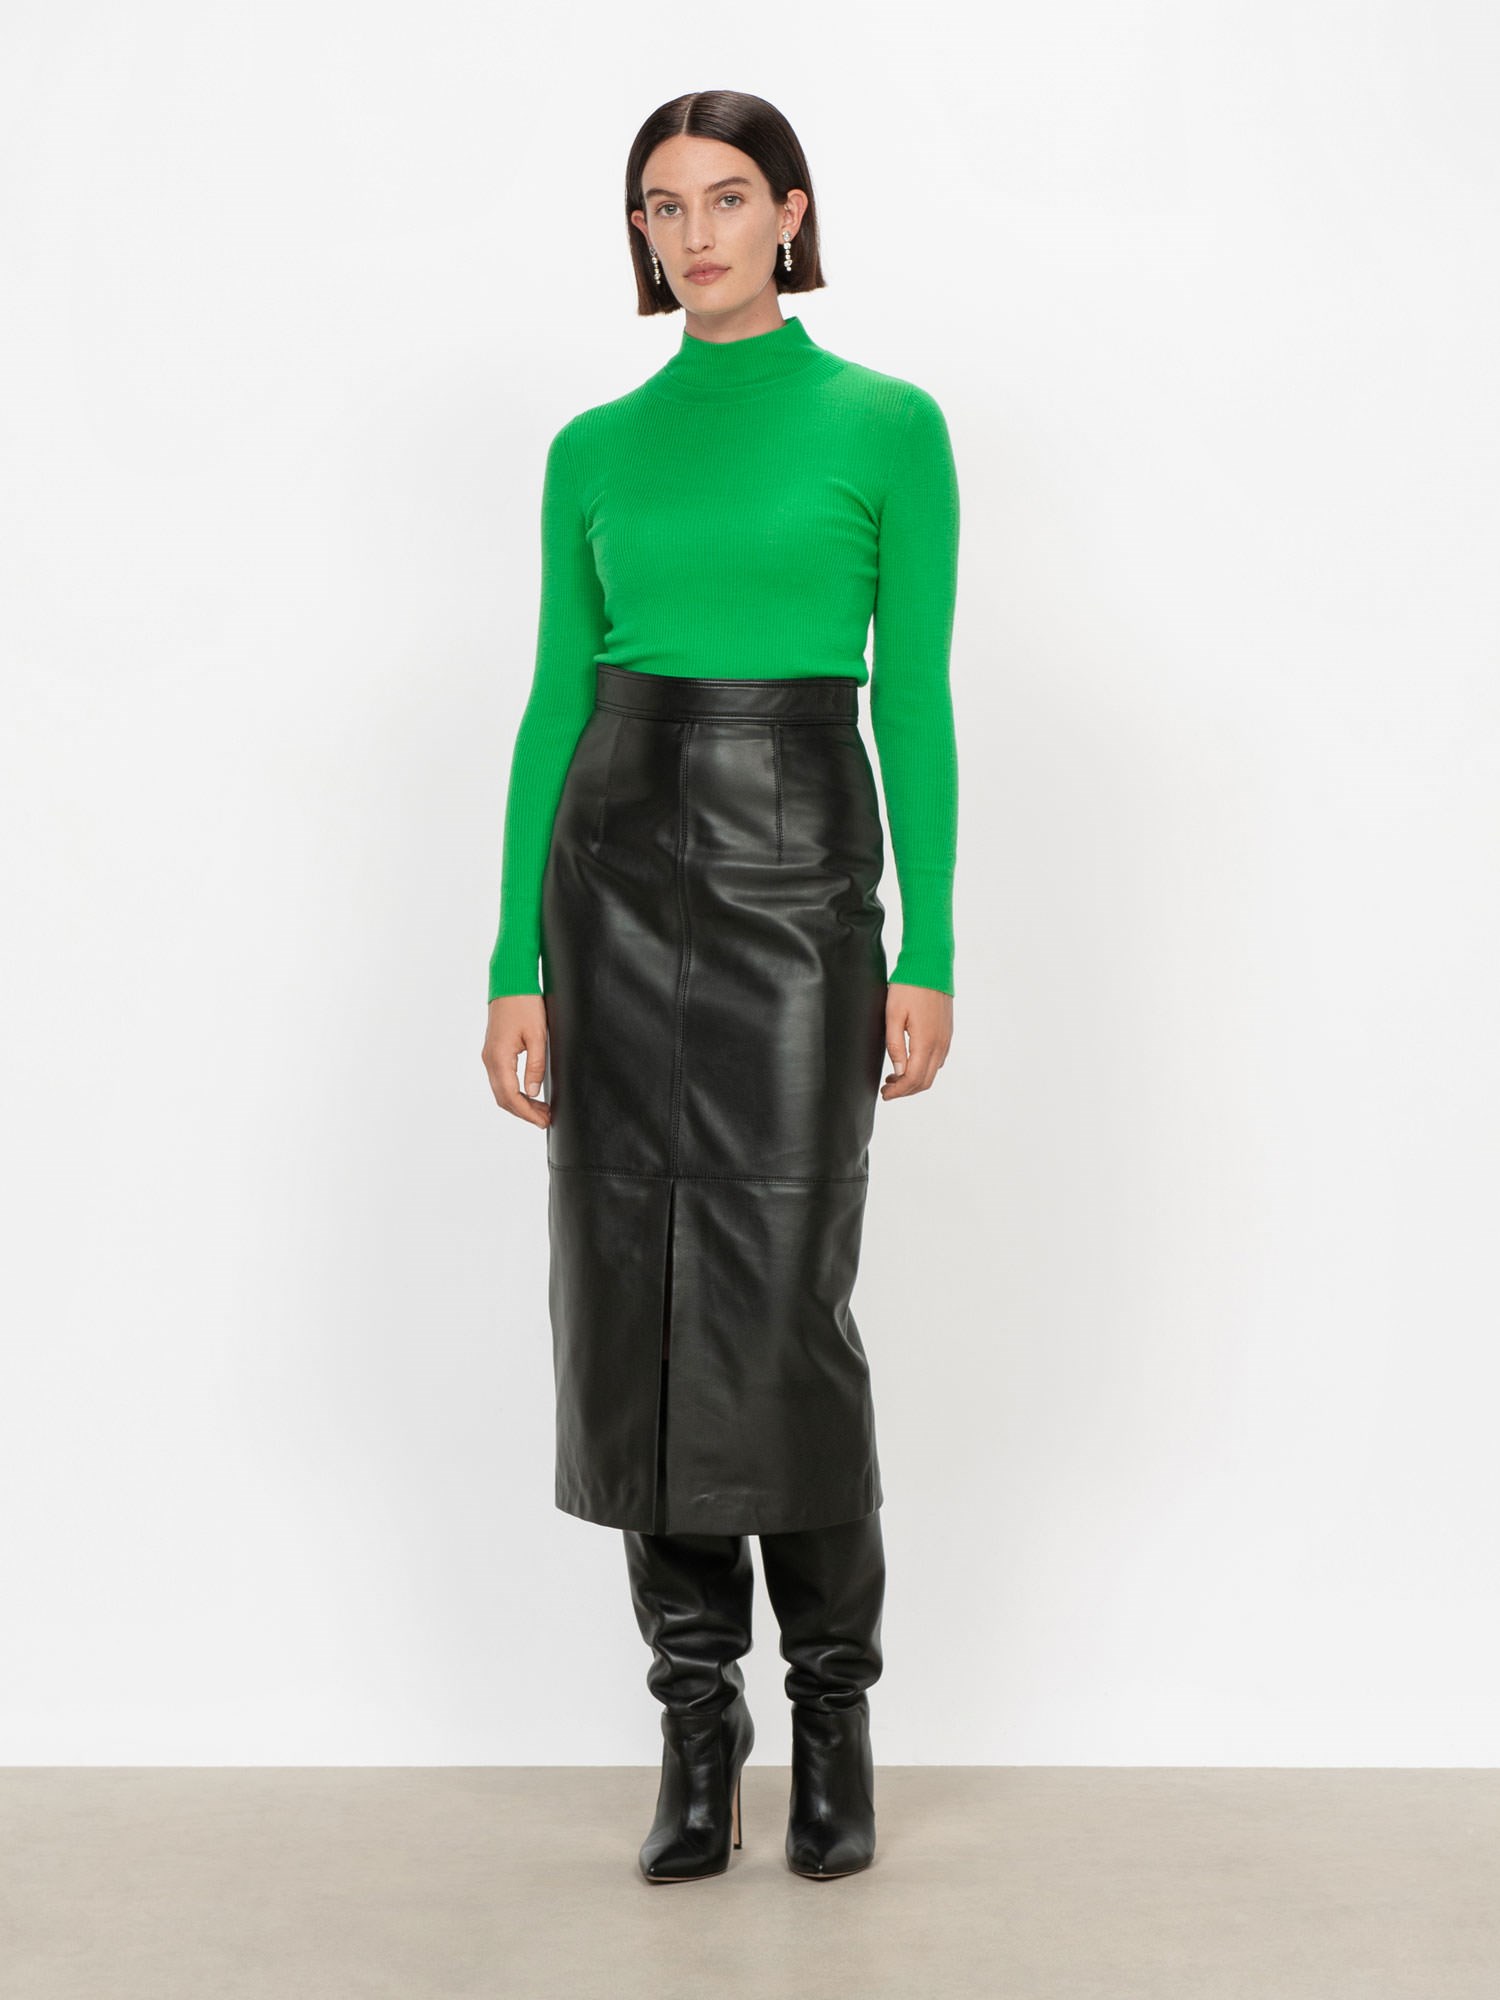 Structured Leather Pencil Skirt | Buy Skirts Online - Veronika Maine